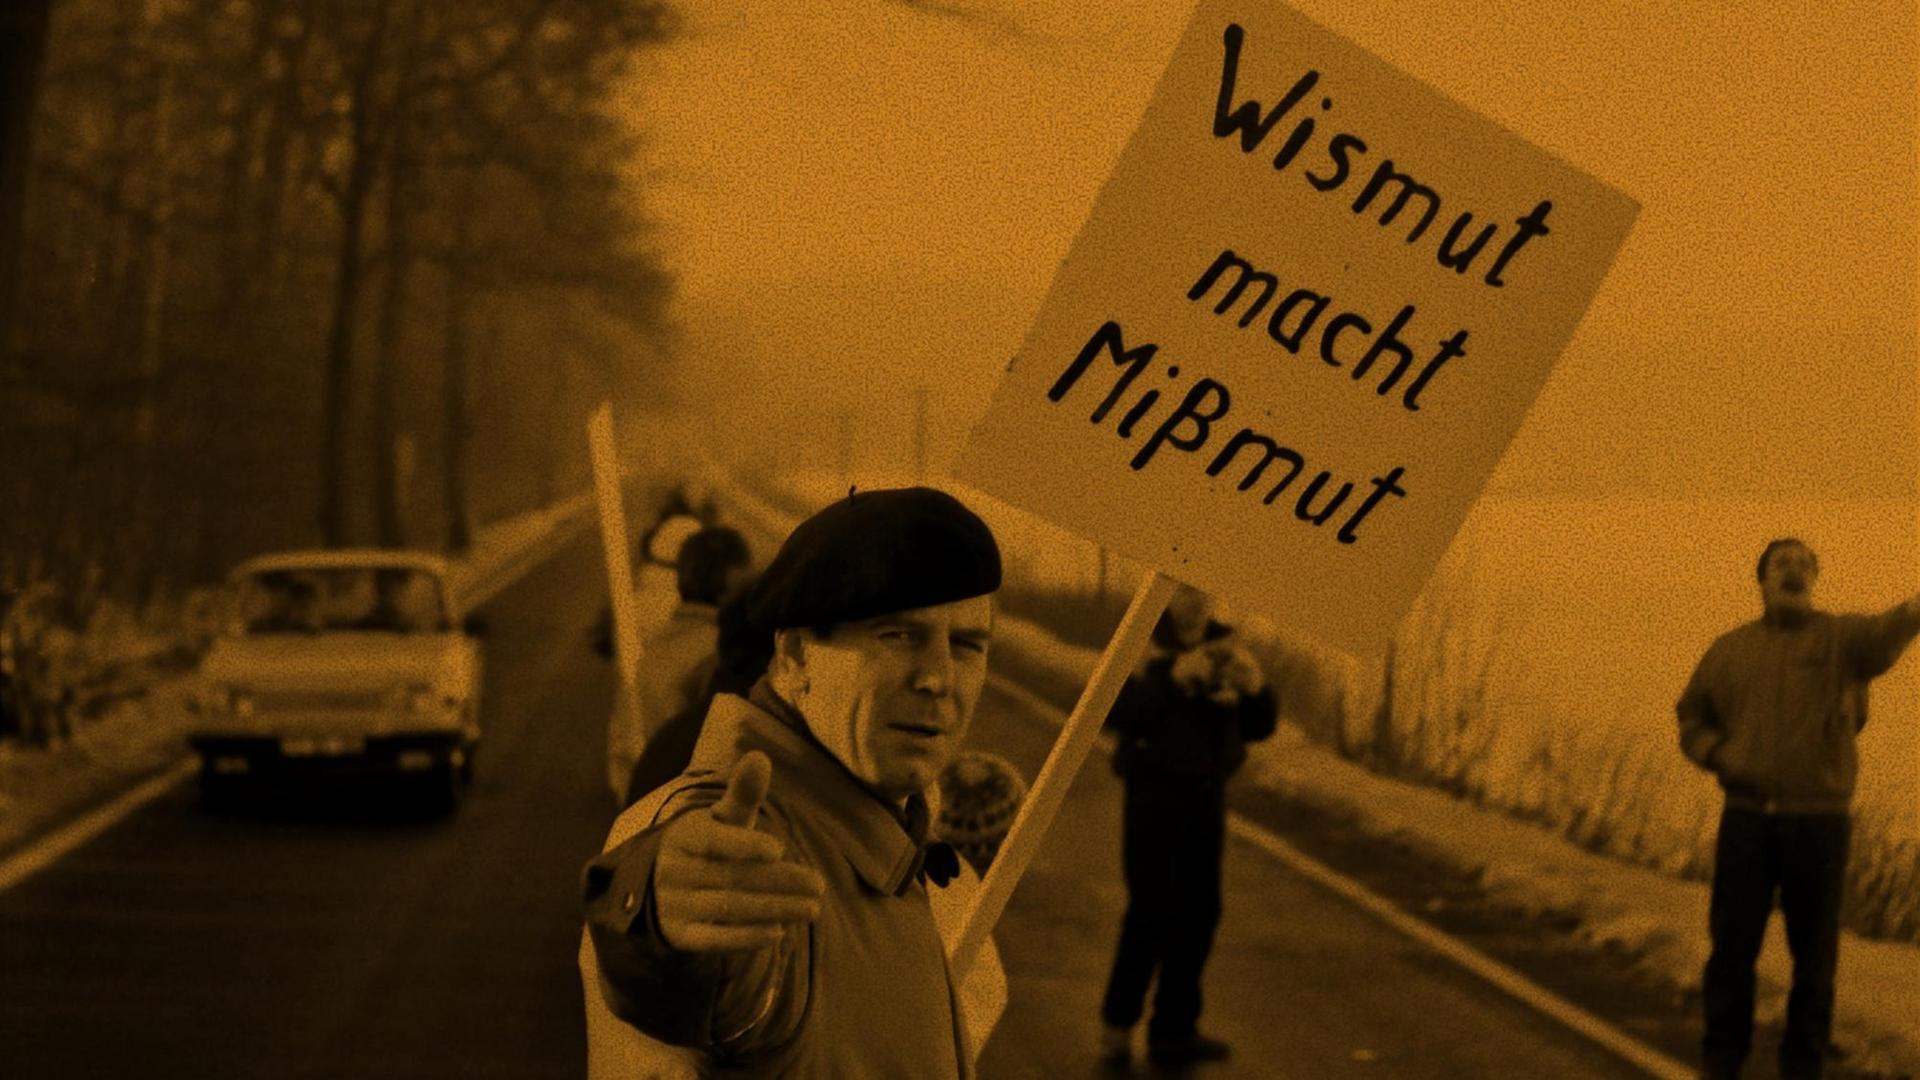 Demo DDR, Herbst 1989